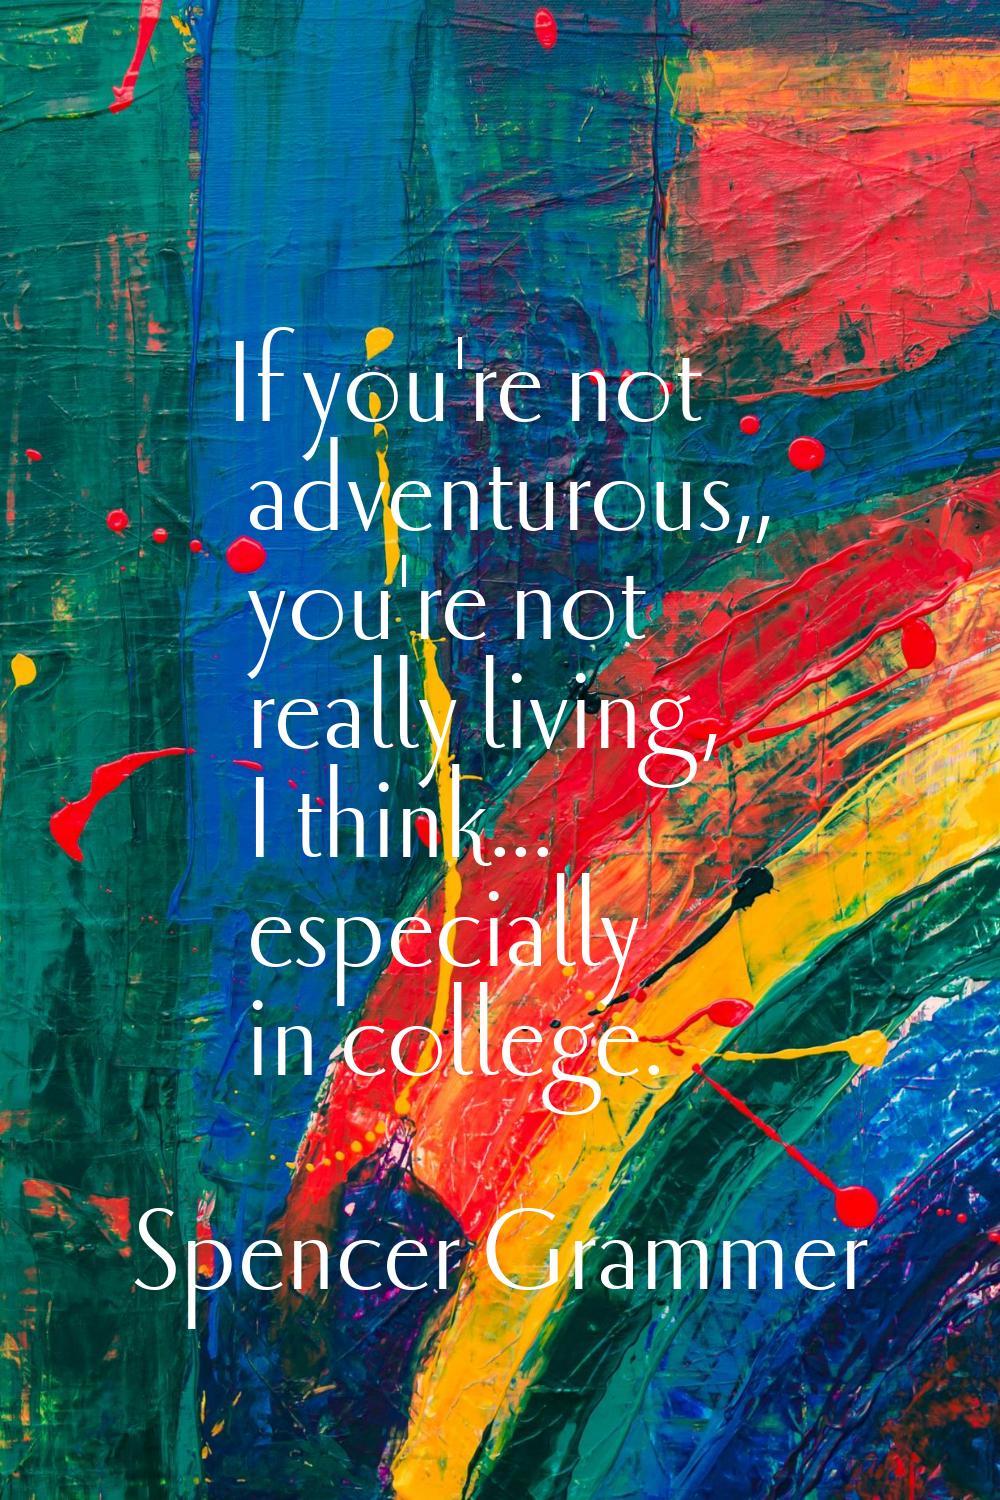 If you're not adventurous,, you're not really living, I think... especially in college.